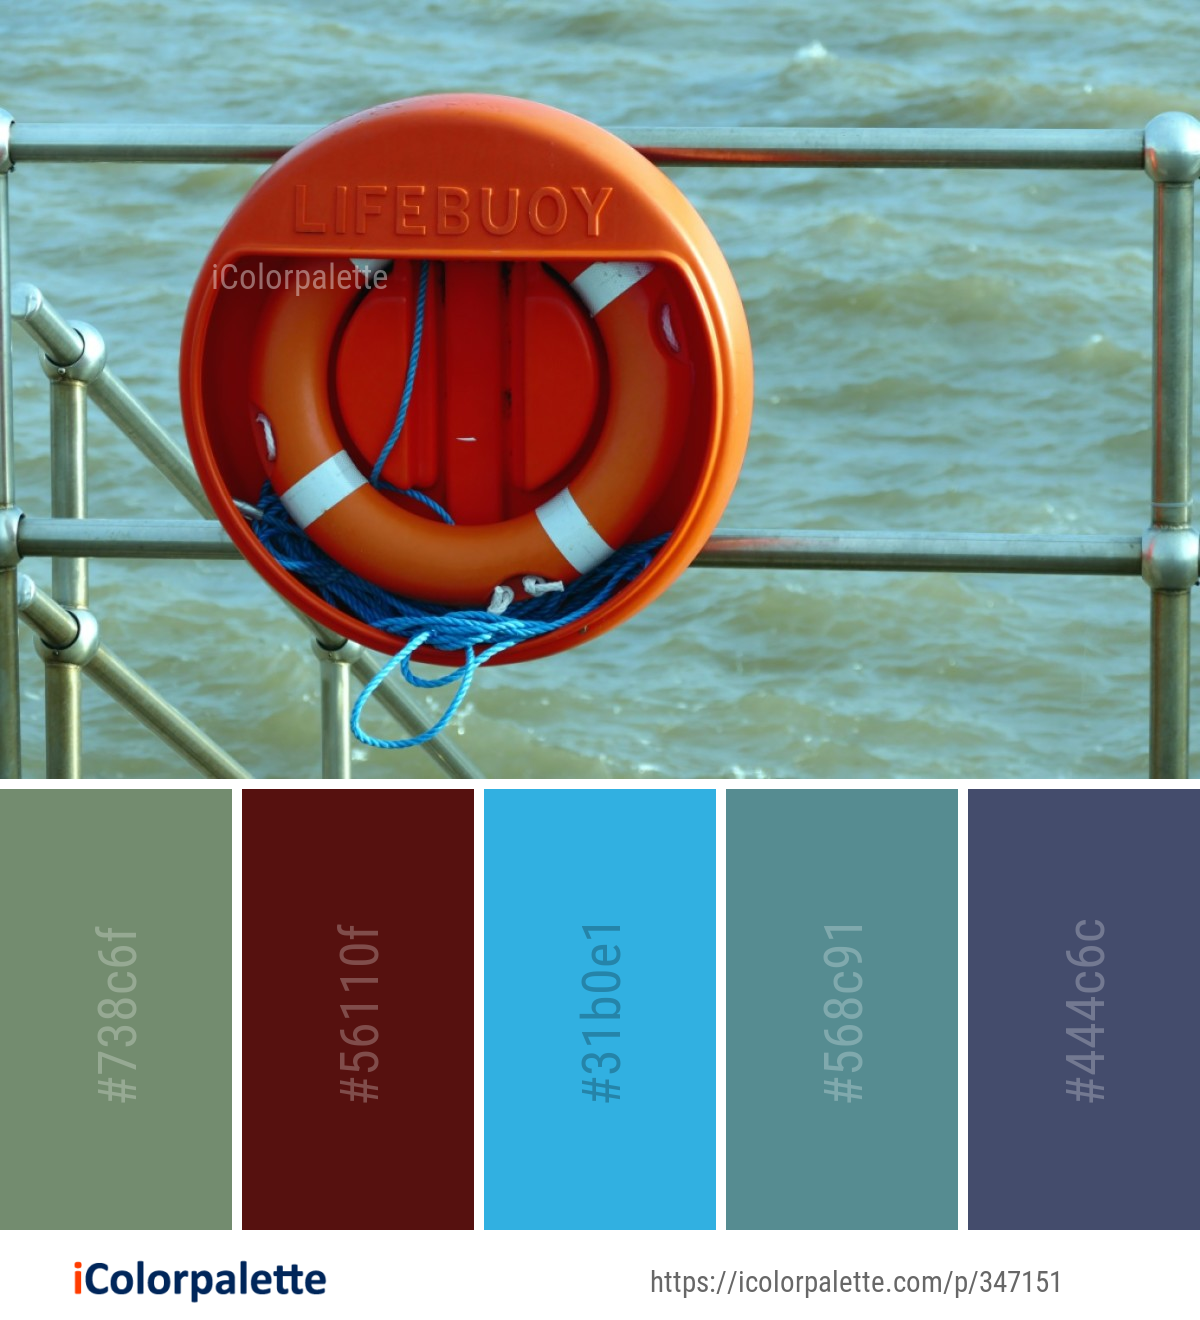 Color Palette Ideas from Lifebuoy Water Personal Flotation Device Image